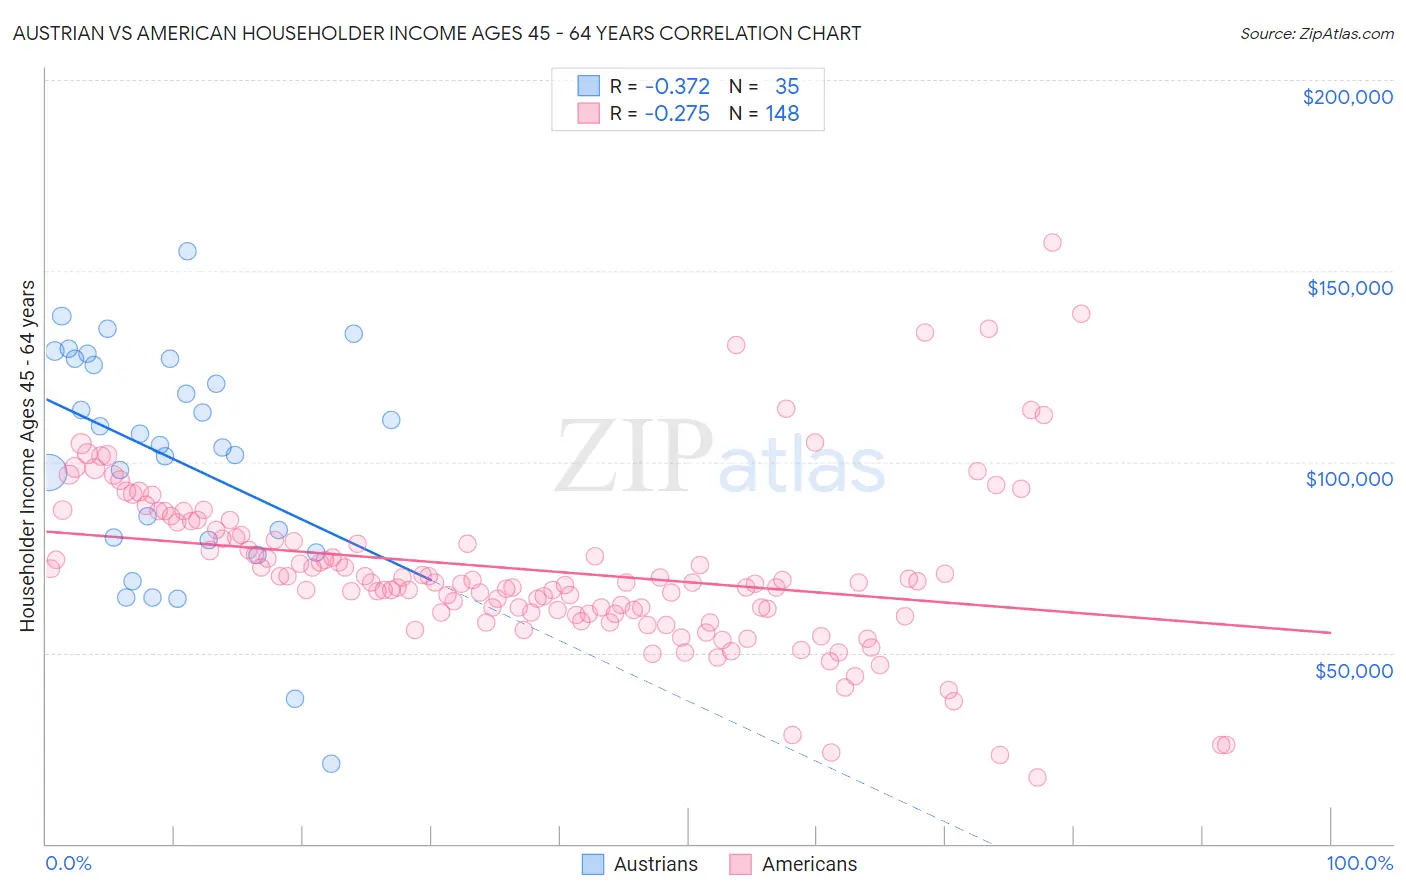 Austrian vs American Householder Income Ages 45 - 64 years